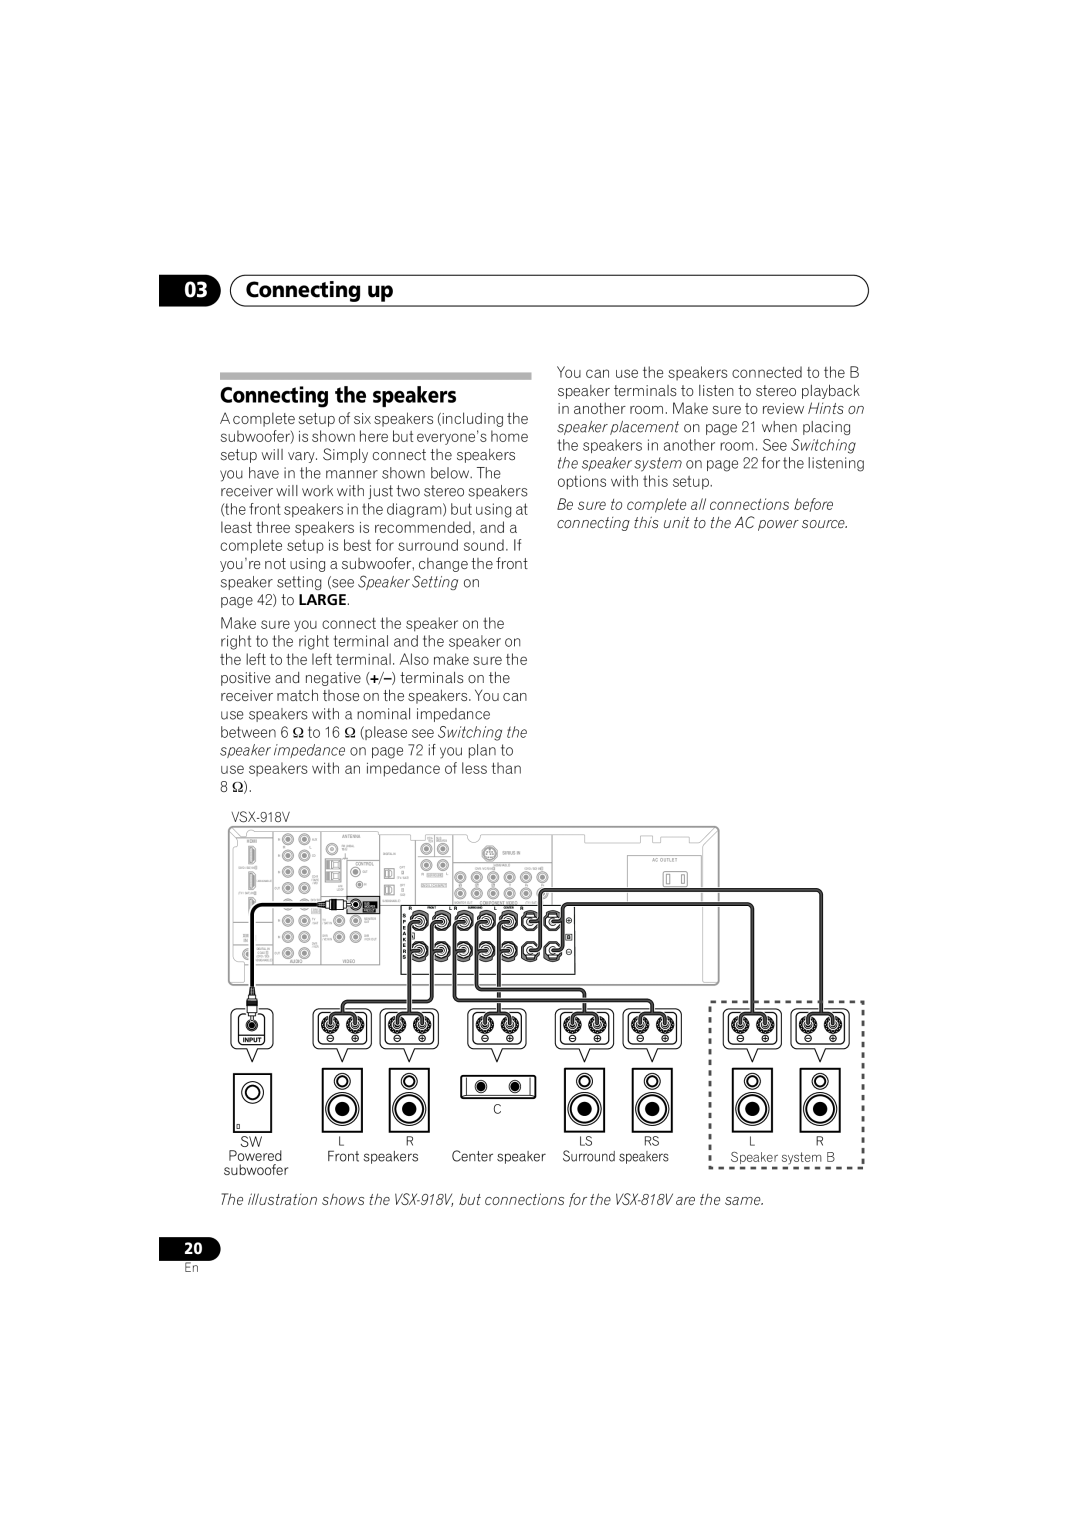 Pioneer VSX-918V, VSX-818V operating instructions Connecting up Connecting the speakers, Speaker system B 